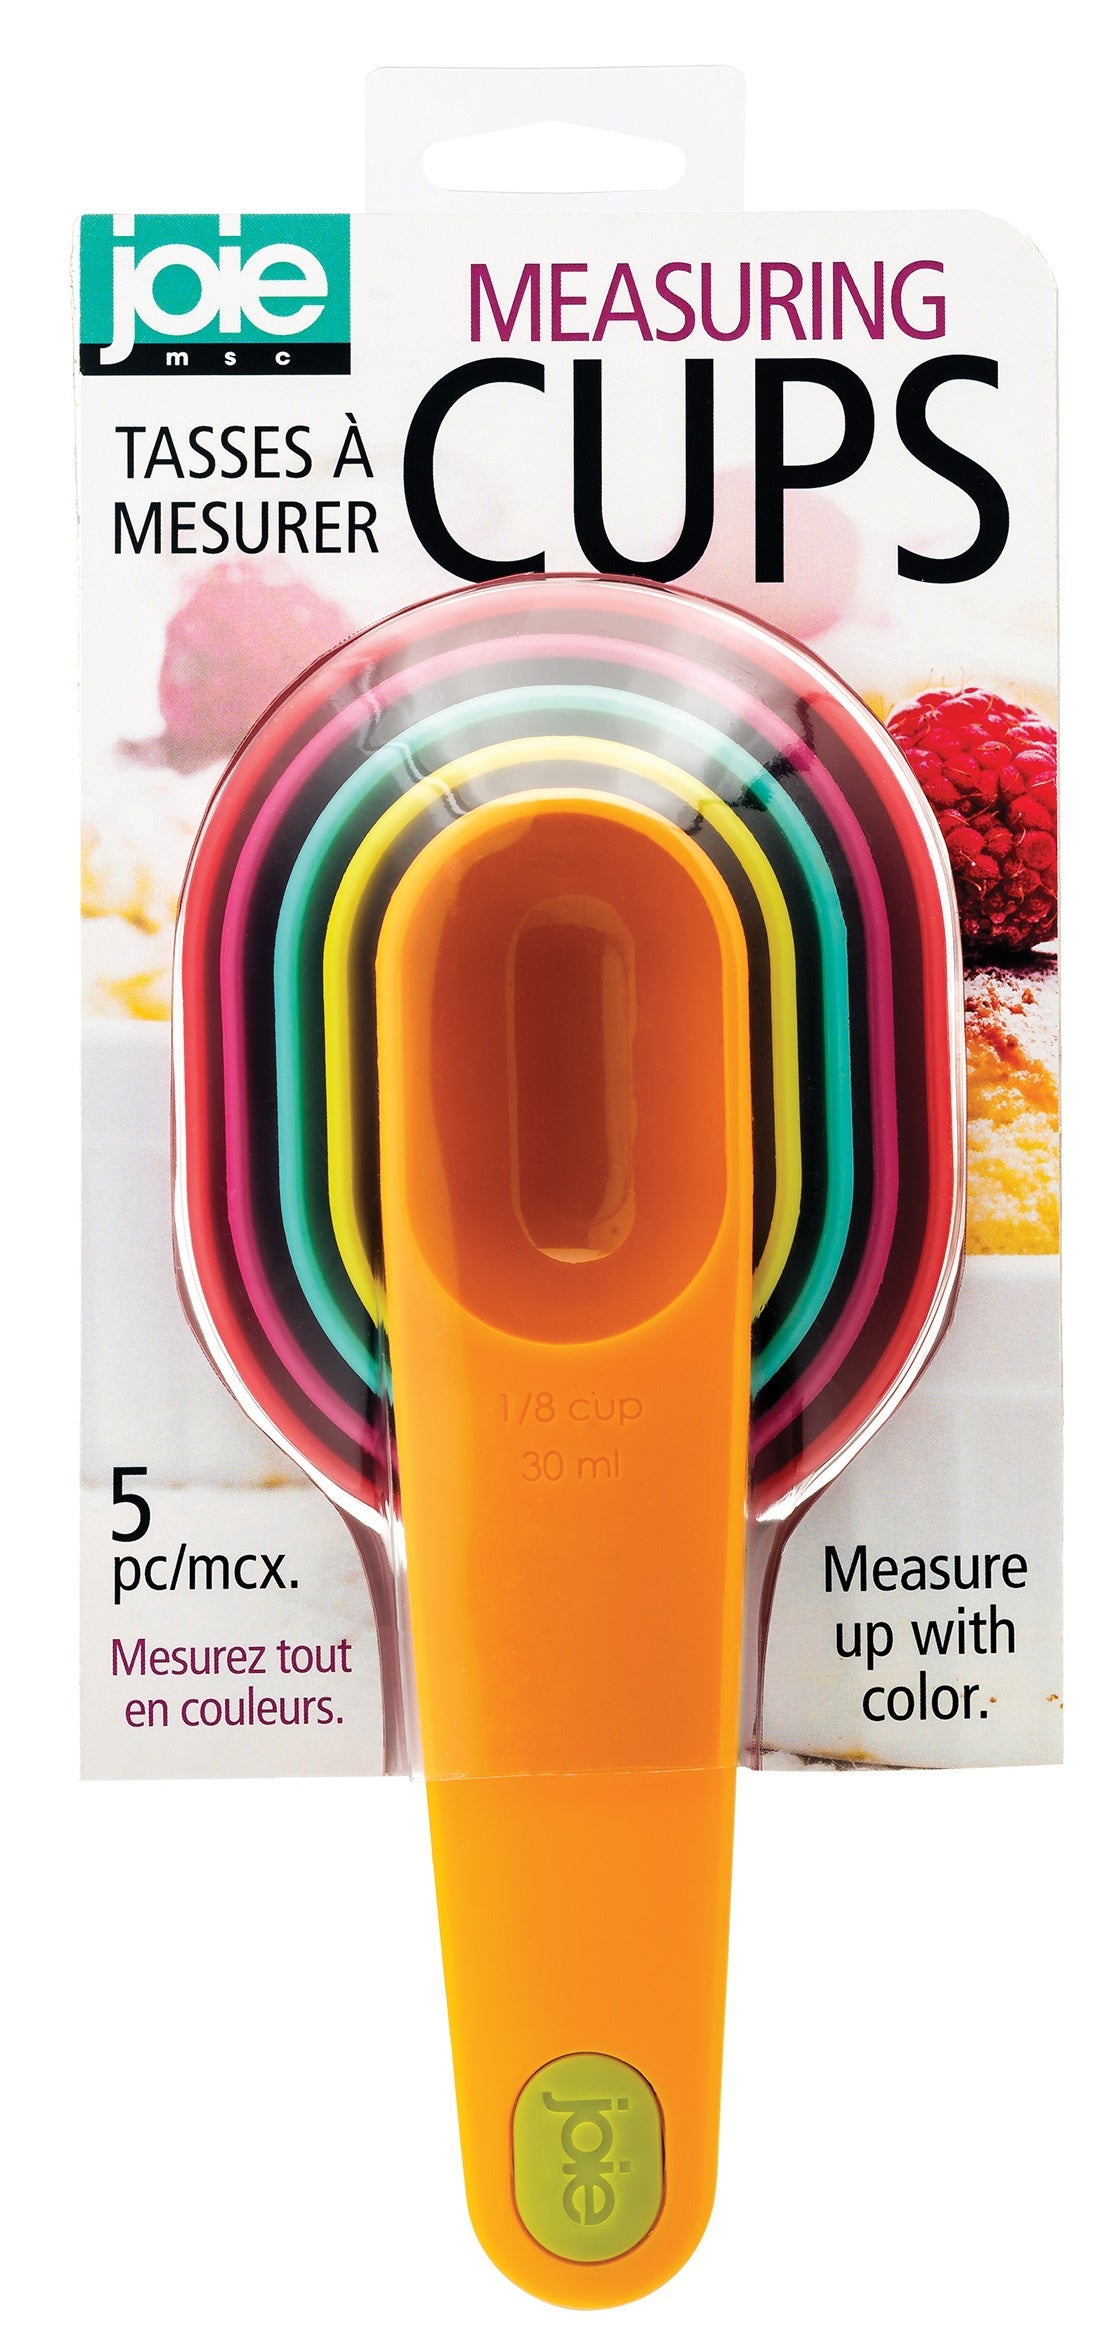 Joie MSC 26802 Measuring Cups, Assorted Colors